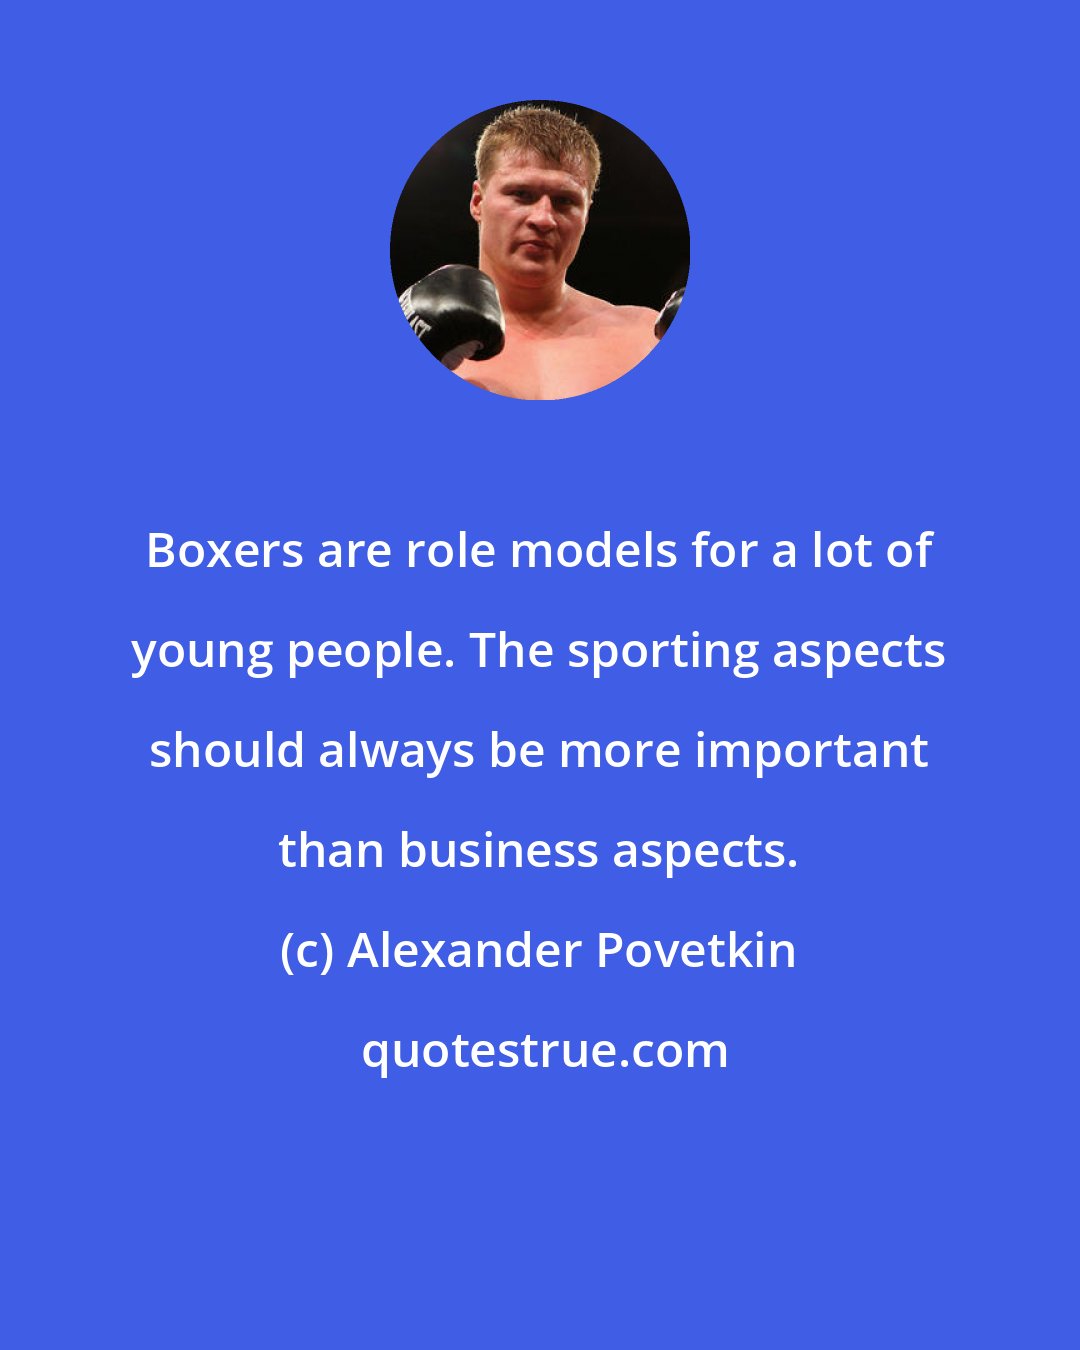 Alexander Povetkin: Boxers are role models for a lot of young people. The sporting aspects should always be more important than business aspects.